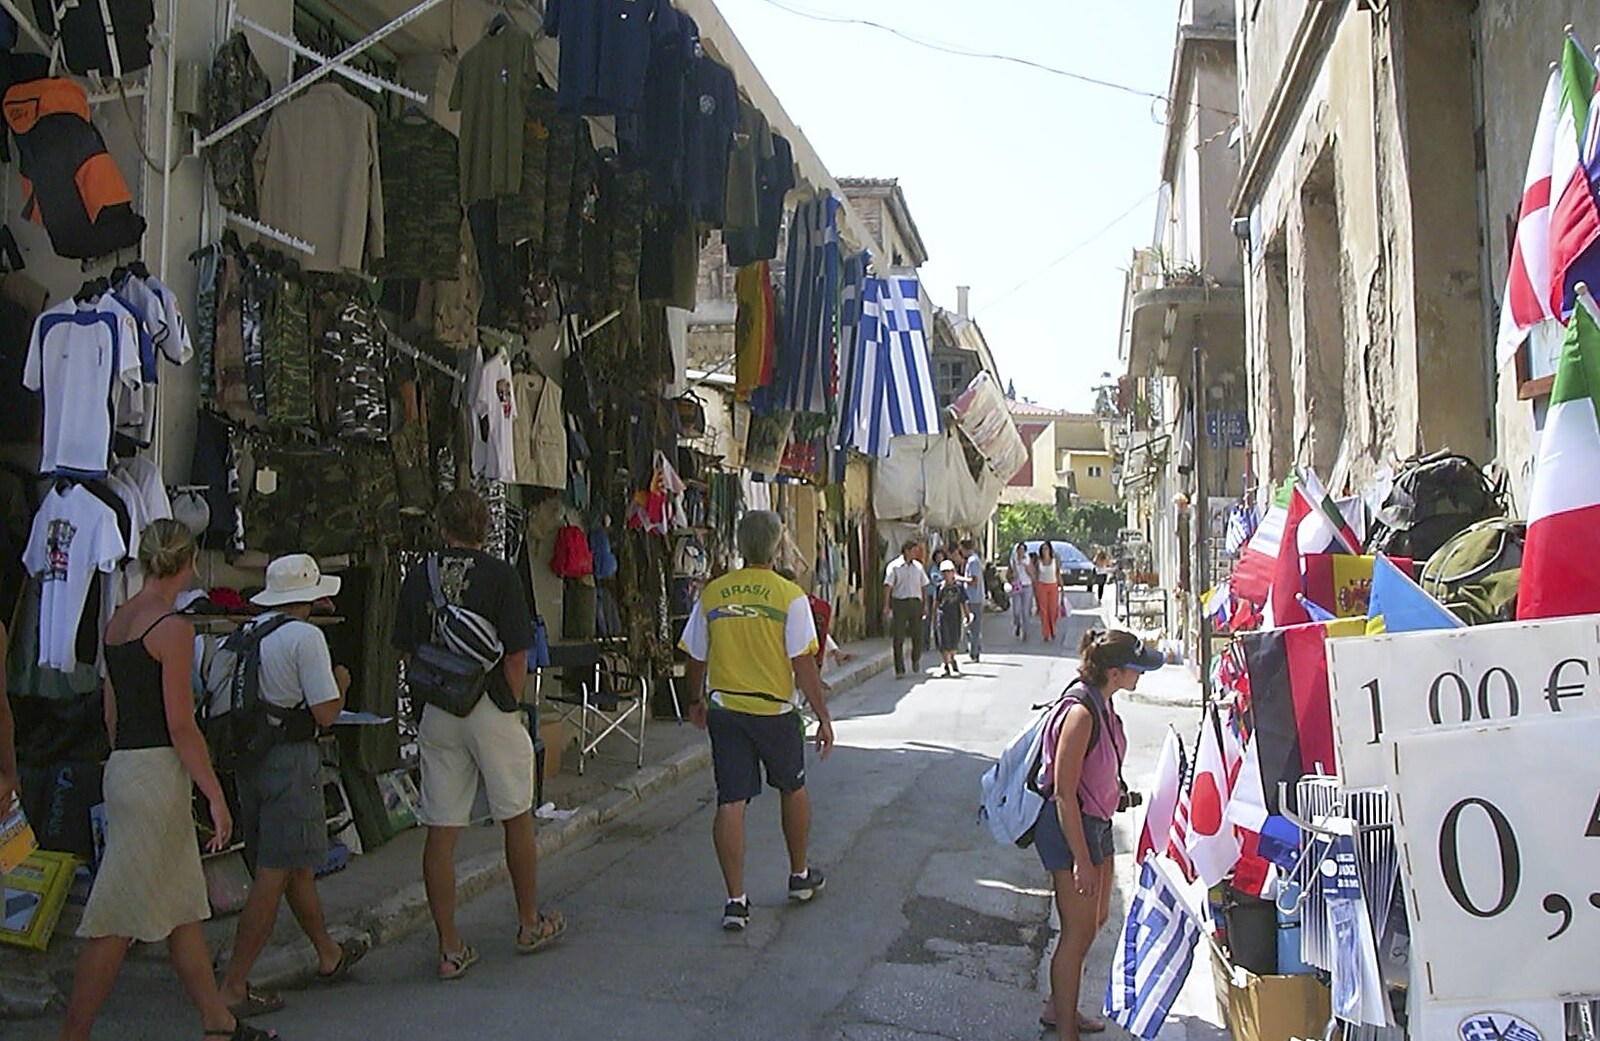 A Postcard From Athens: A Day Trip to the Olympics, Greece - 19th August 2004: Another souvenir street